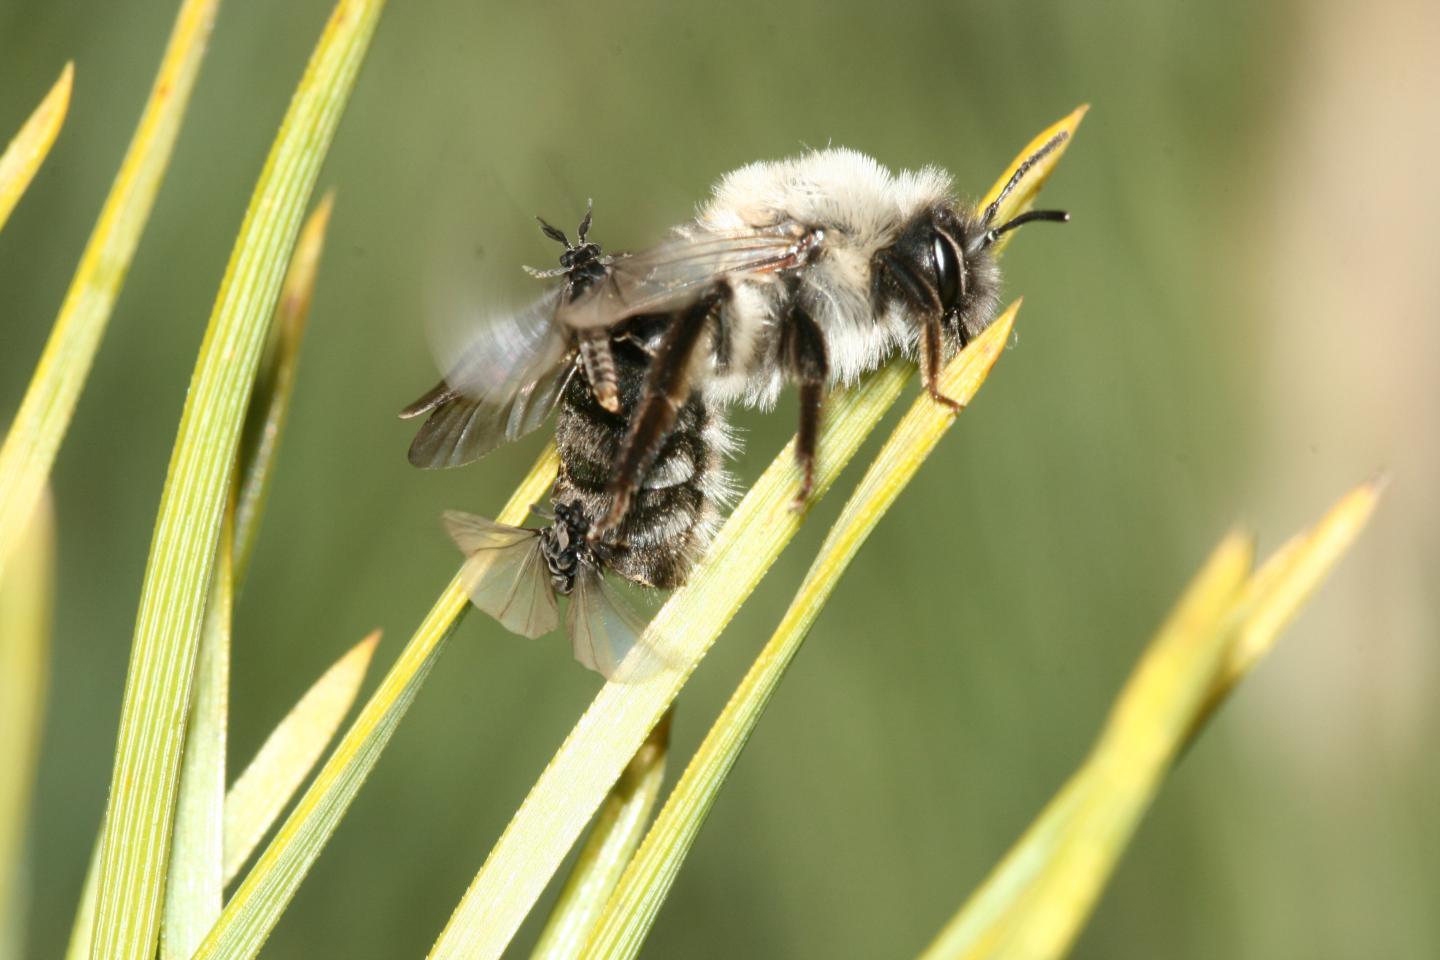 Mining Bee with Twisted-Winged Parasites